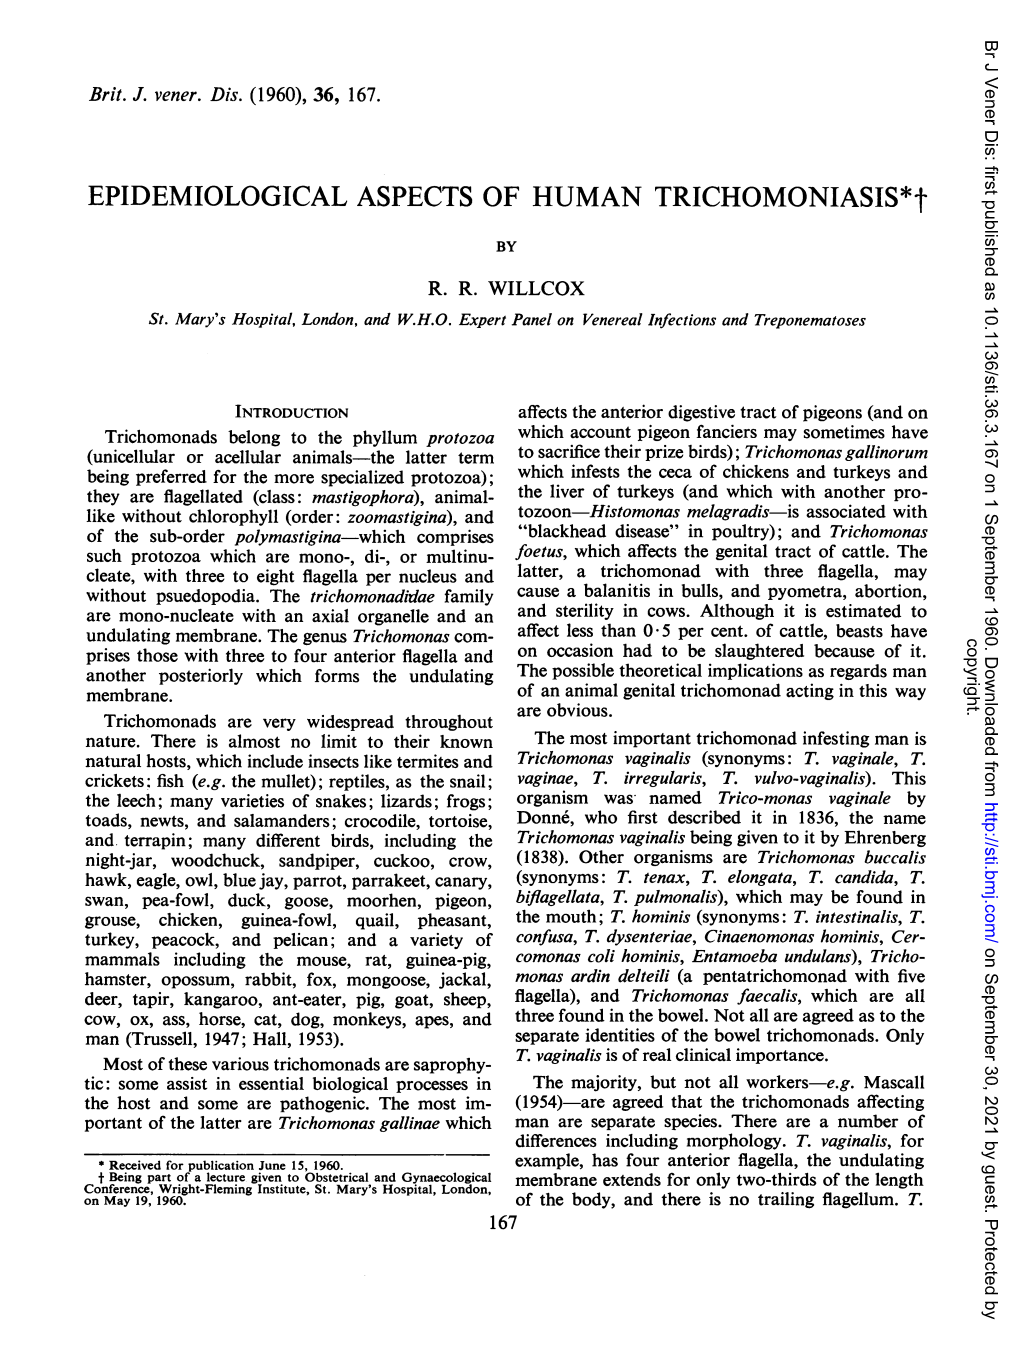 EPIDEMIOLOGICAL ASPECTS of HUMAN TRICHOMONIASIS*T